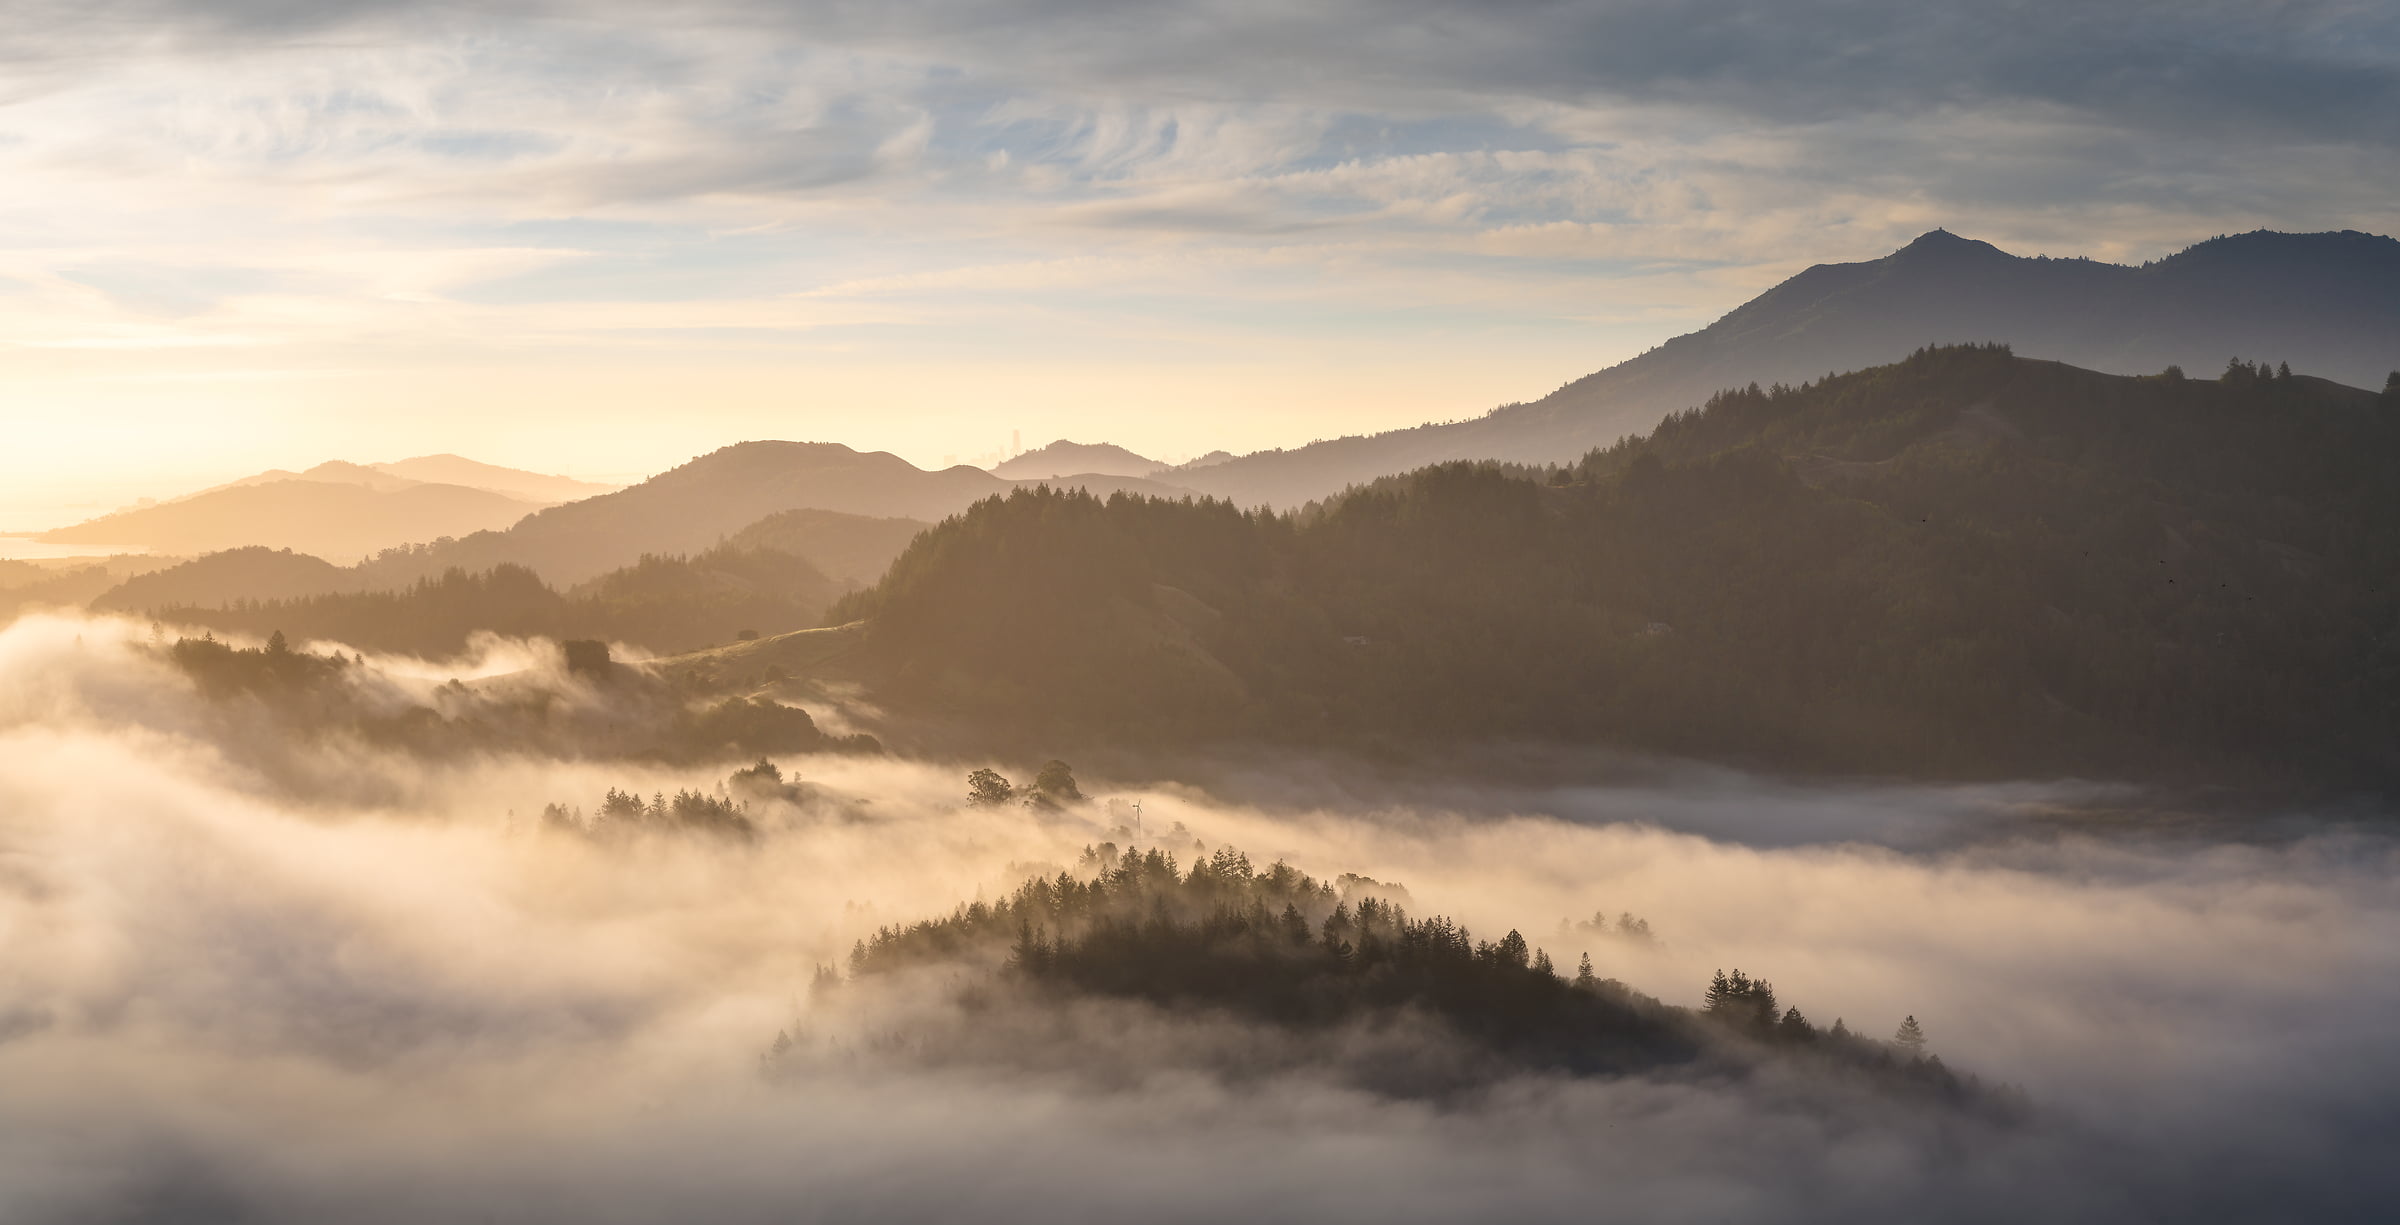 230 megapixels! A very high resolution, large-format VAST photo print of clouds and mountains; landscape photograph created by Jeff Lewis in Marin County, California